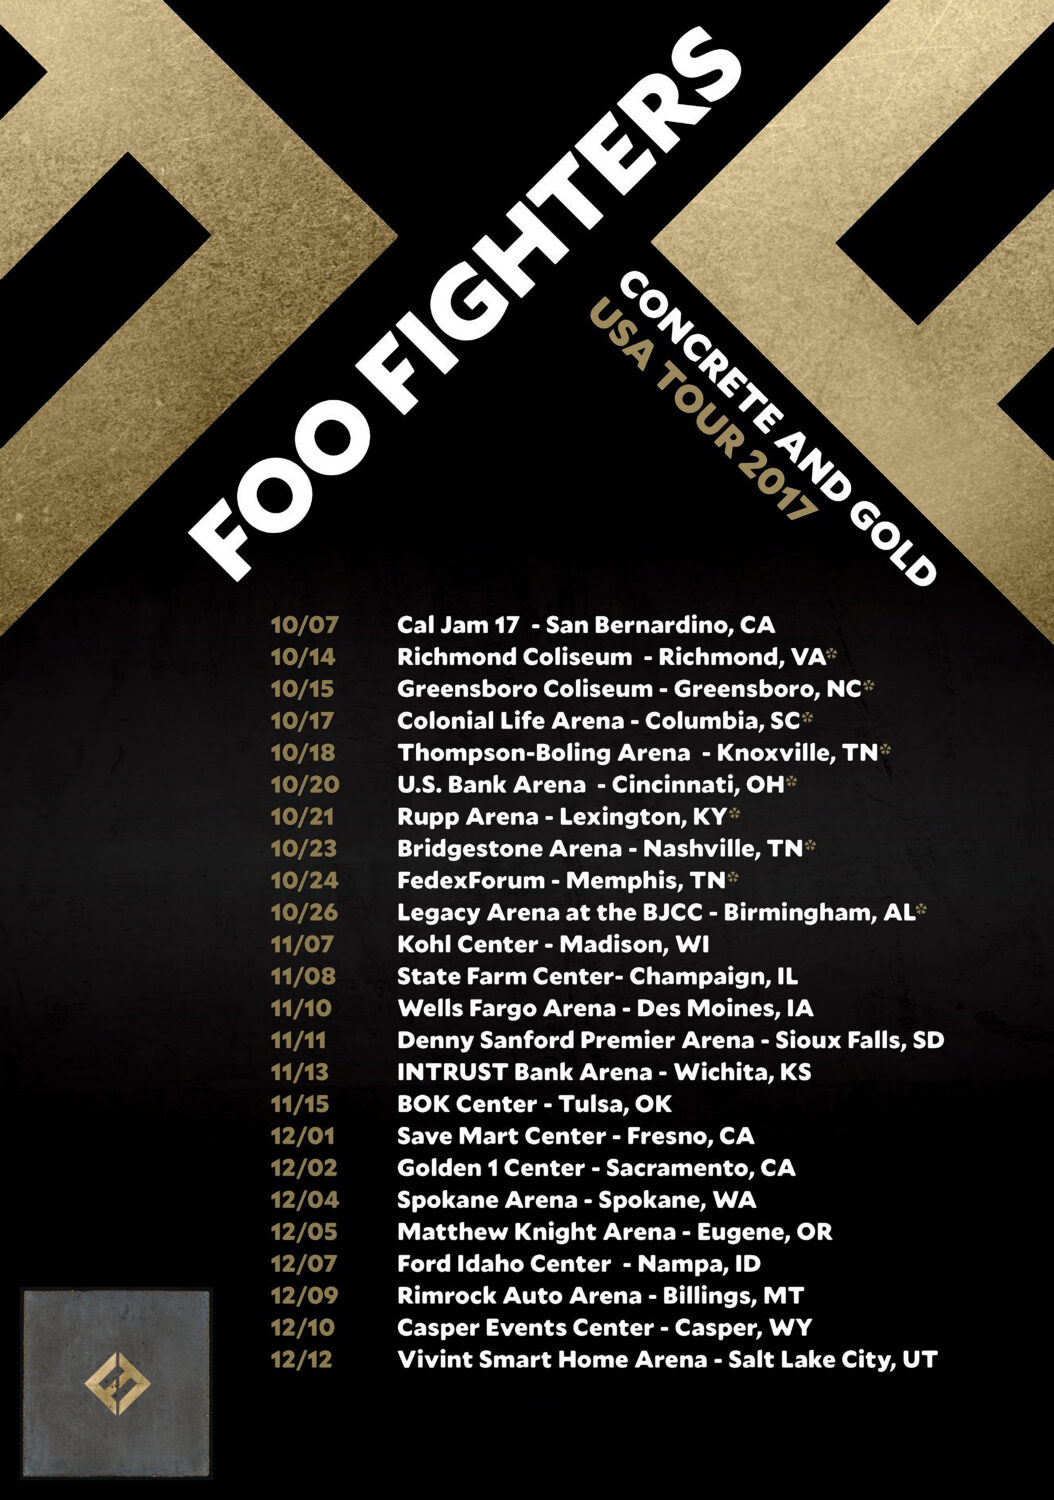 11 x 17 inch 2017 Concert promo for Concrete and Gold Tour Concert Promoter Foo Fighters Poster